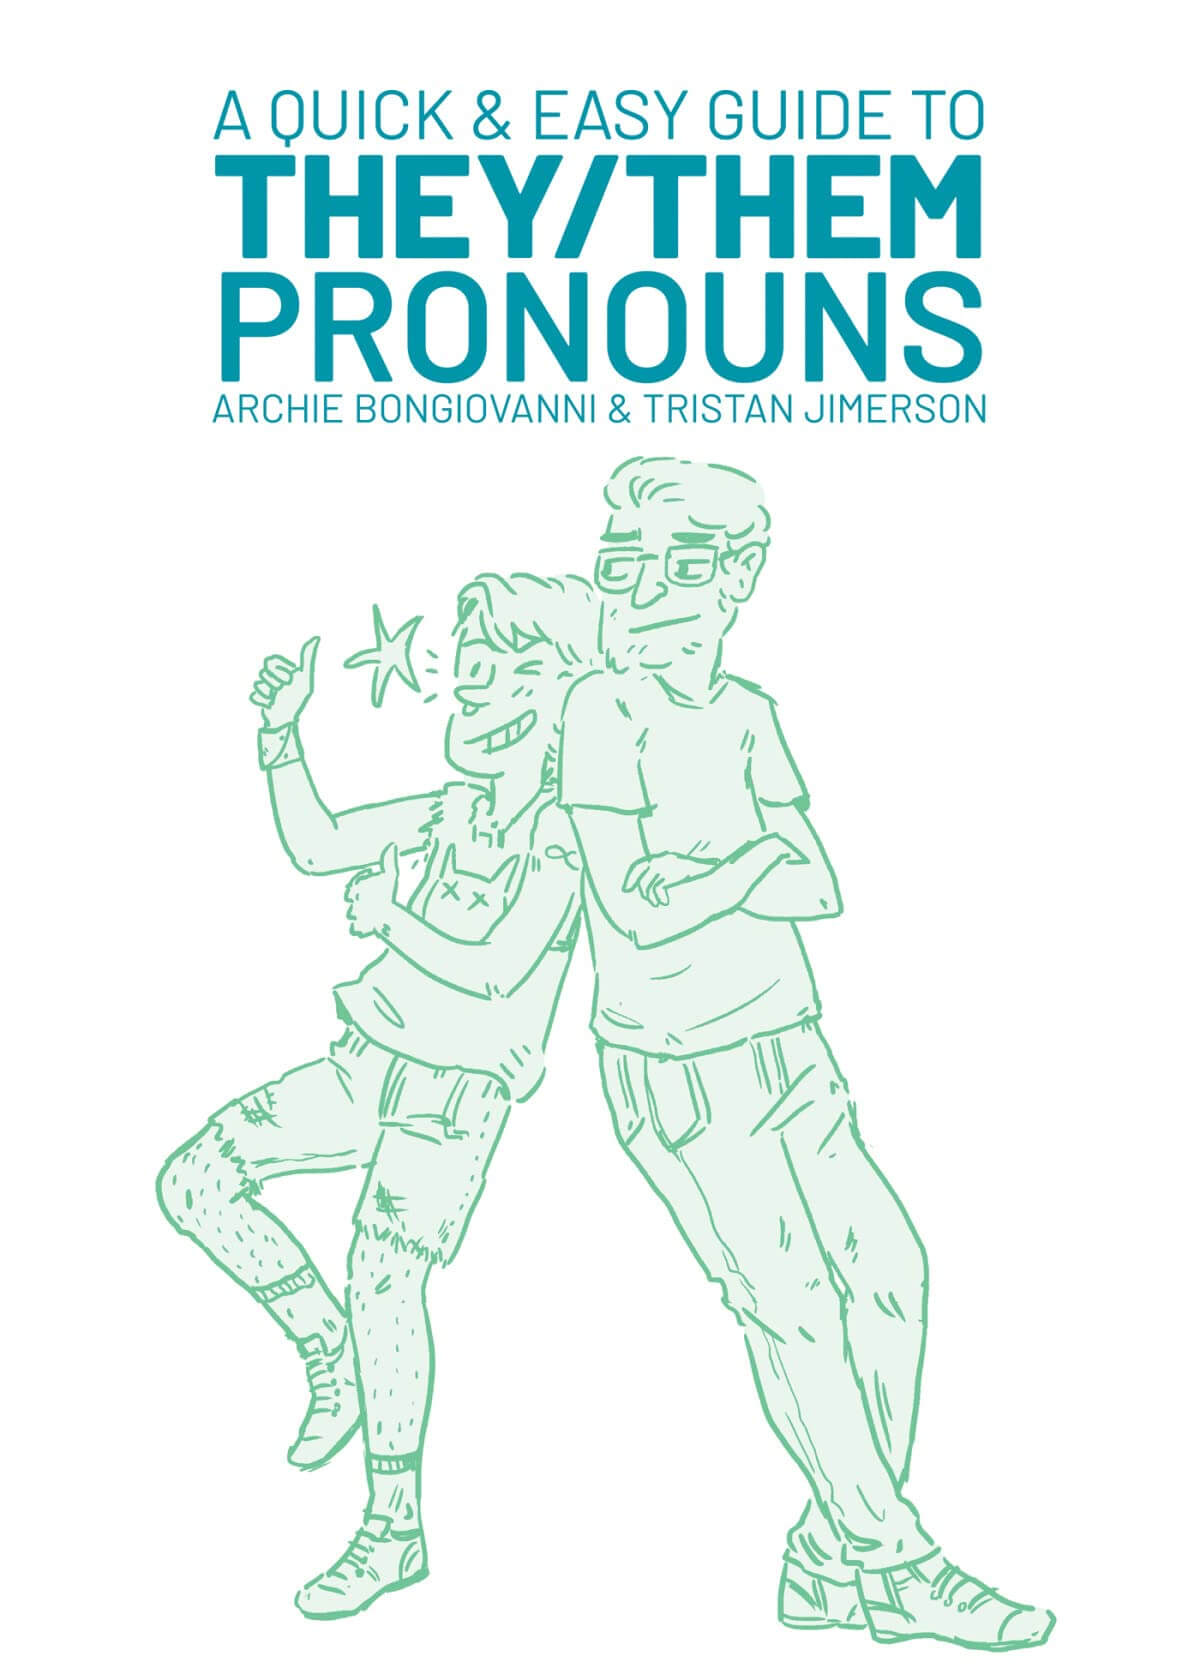 Cover photo of the book A Quick and Easy Guide to They/Them Pronouns by Archi Bongiovanni and Tristan Jimerson